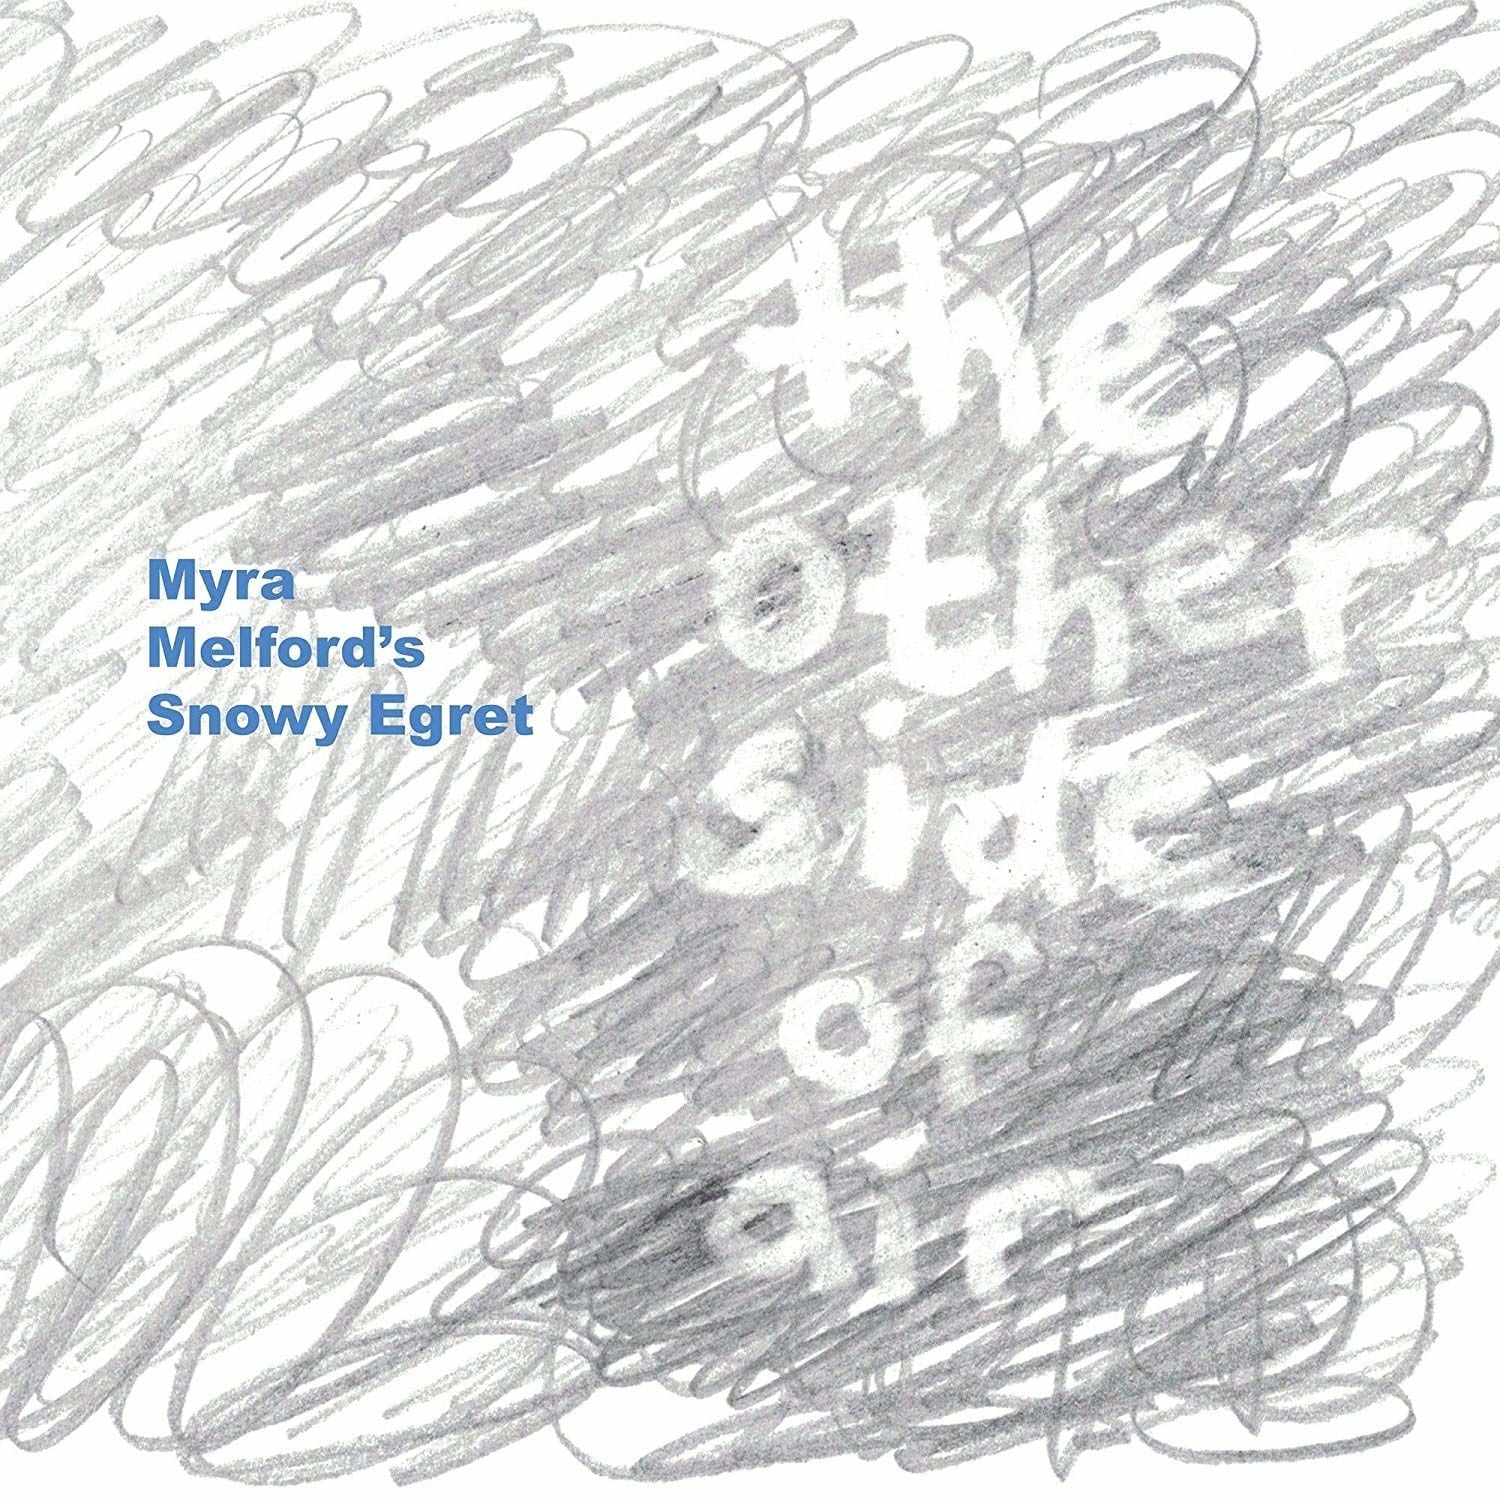 Myra Melford’s Snowy Egret Create Continual Motion and Invention on ‘The Other Side of Air’